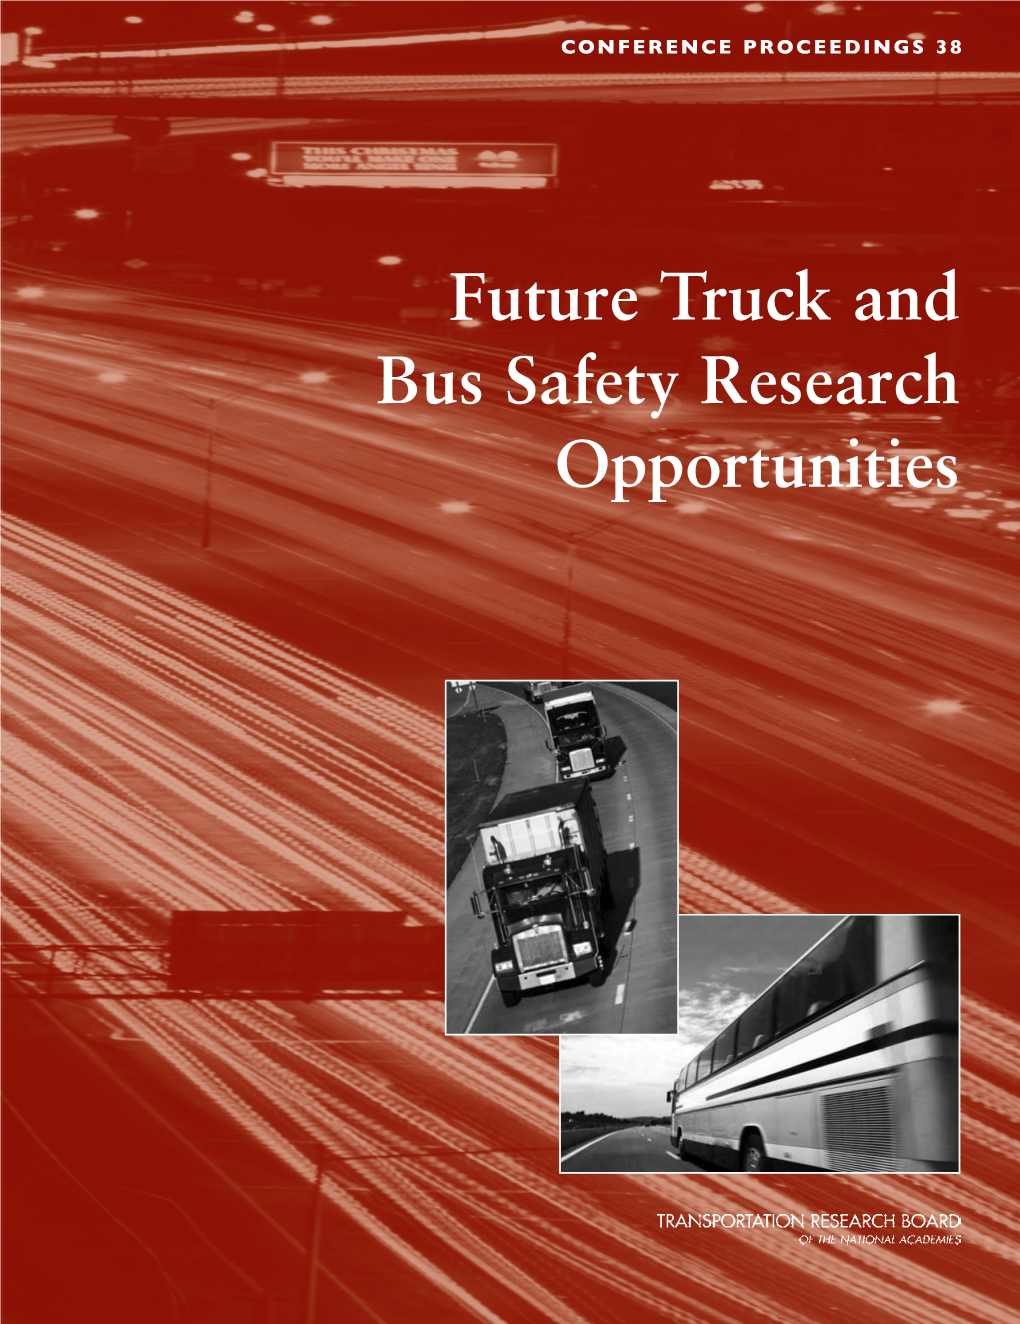 Future Truck and Bus Safety Research Opportunities Opportunities